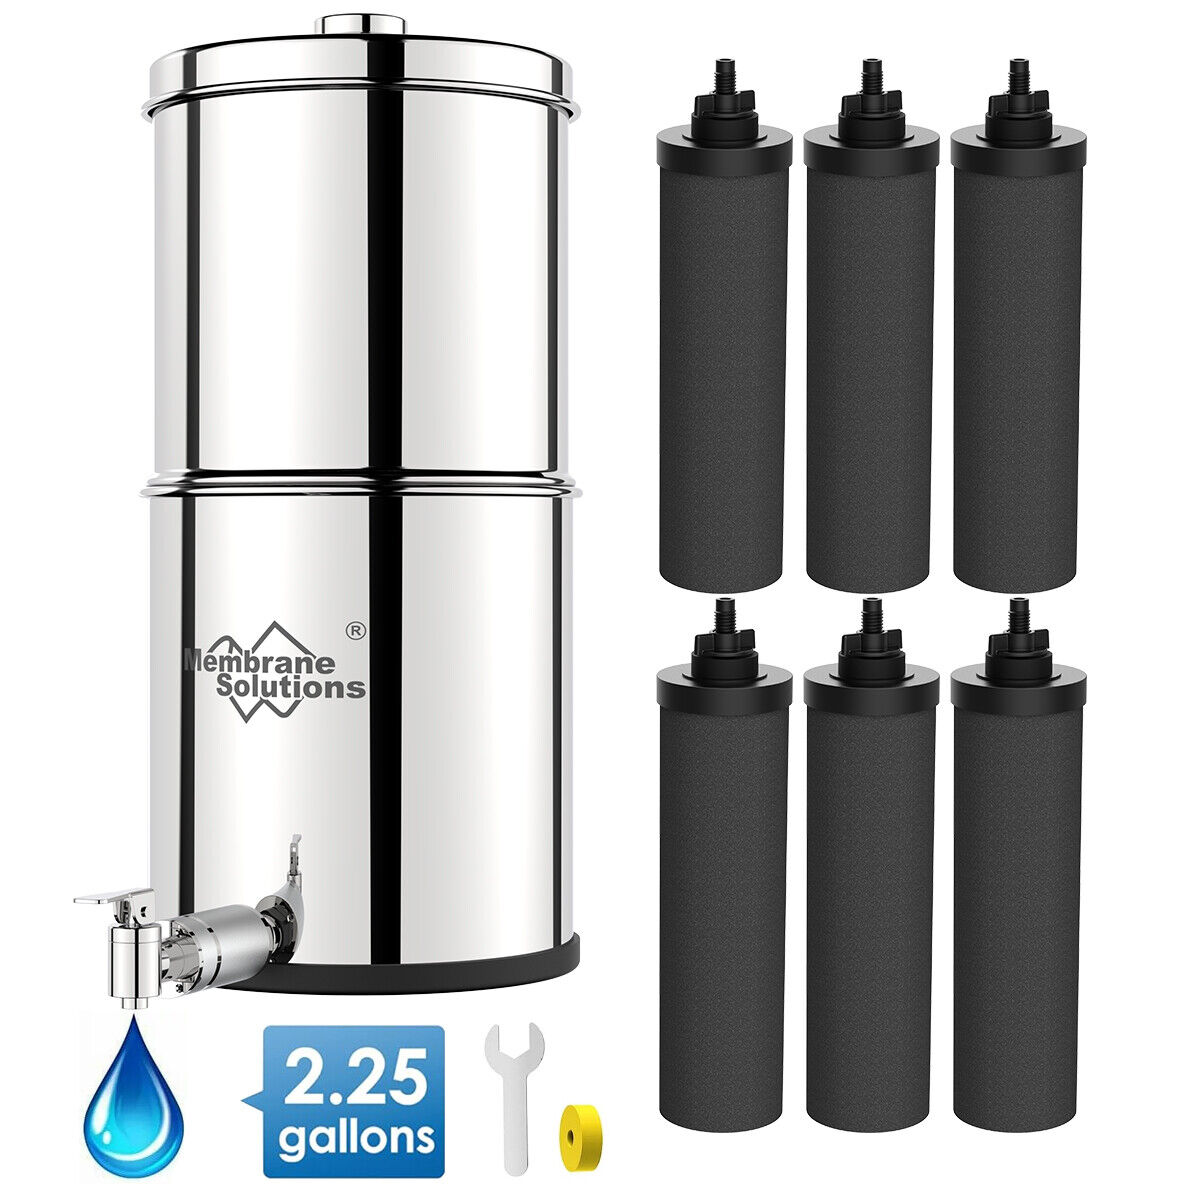 2.25G UV Gravity-Fed Water Filter System Countertop W/6pcs Element Cartridges 